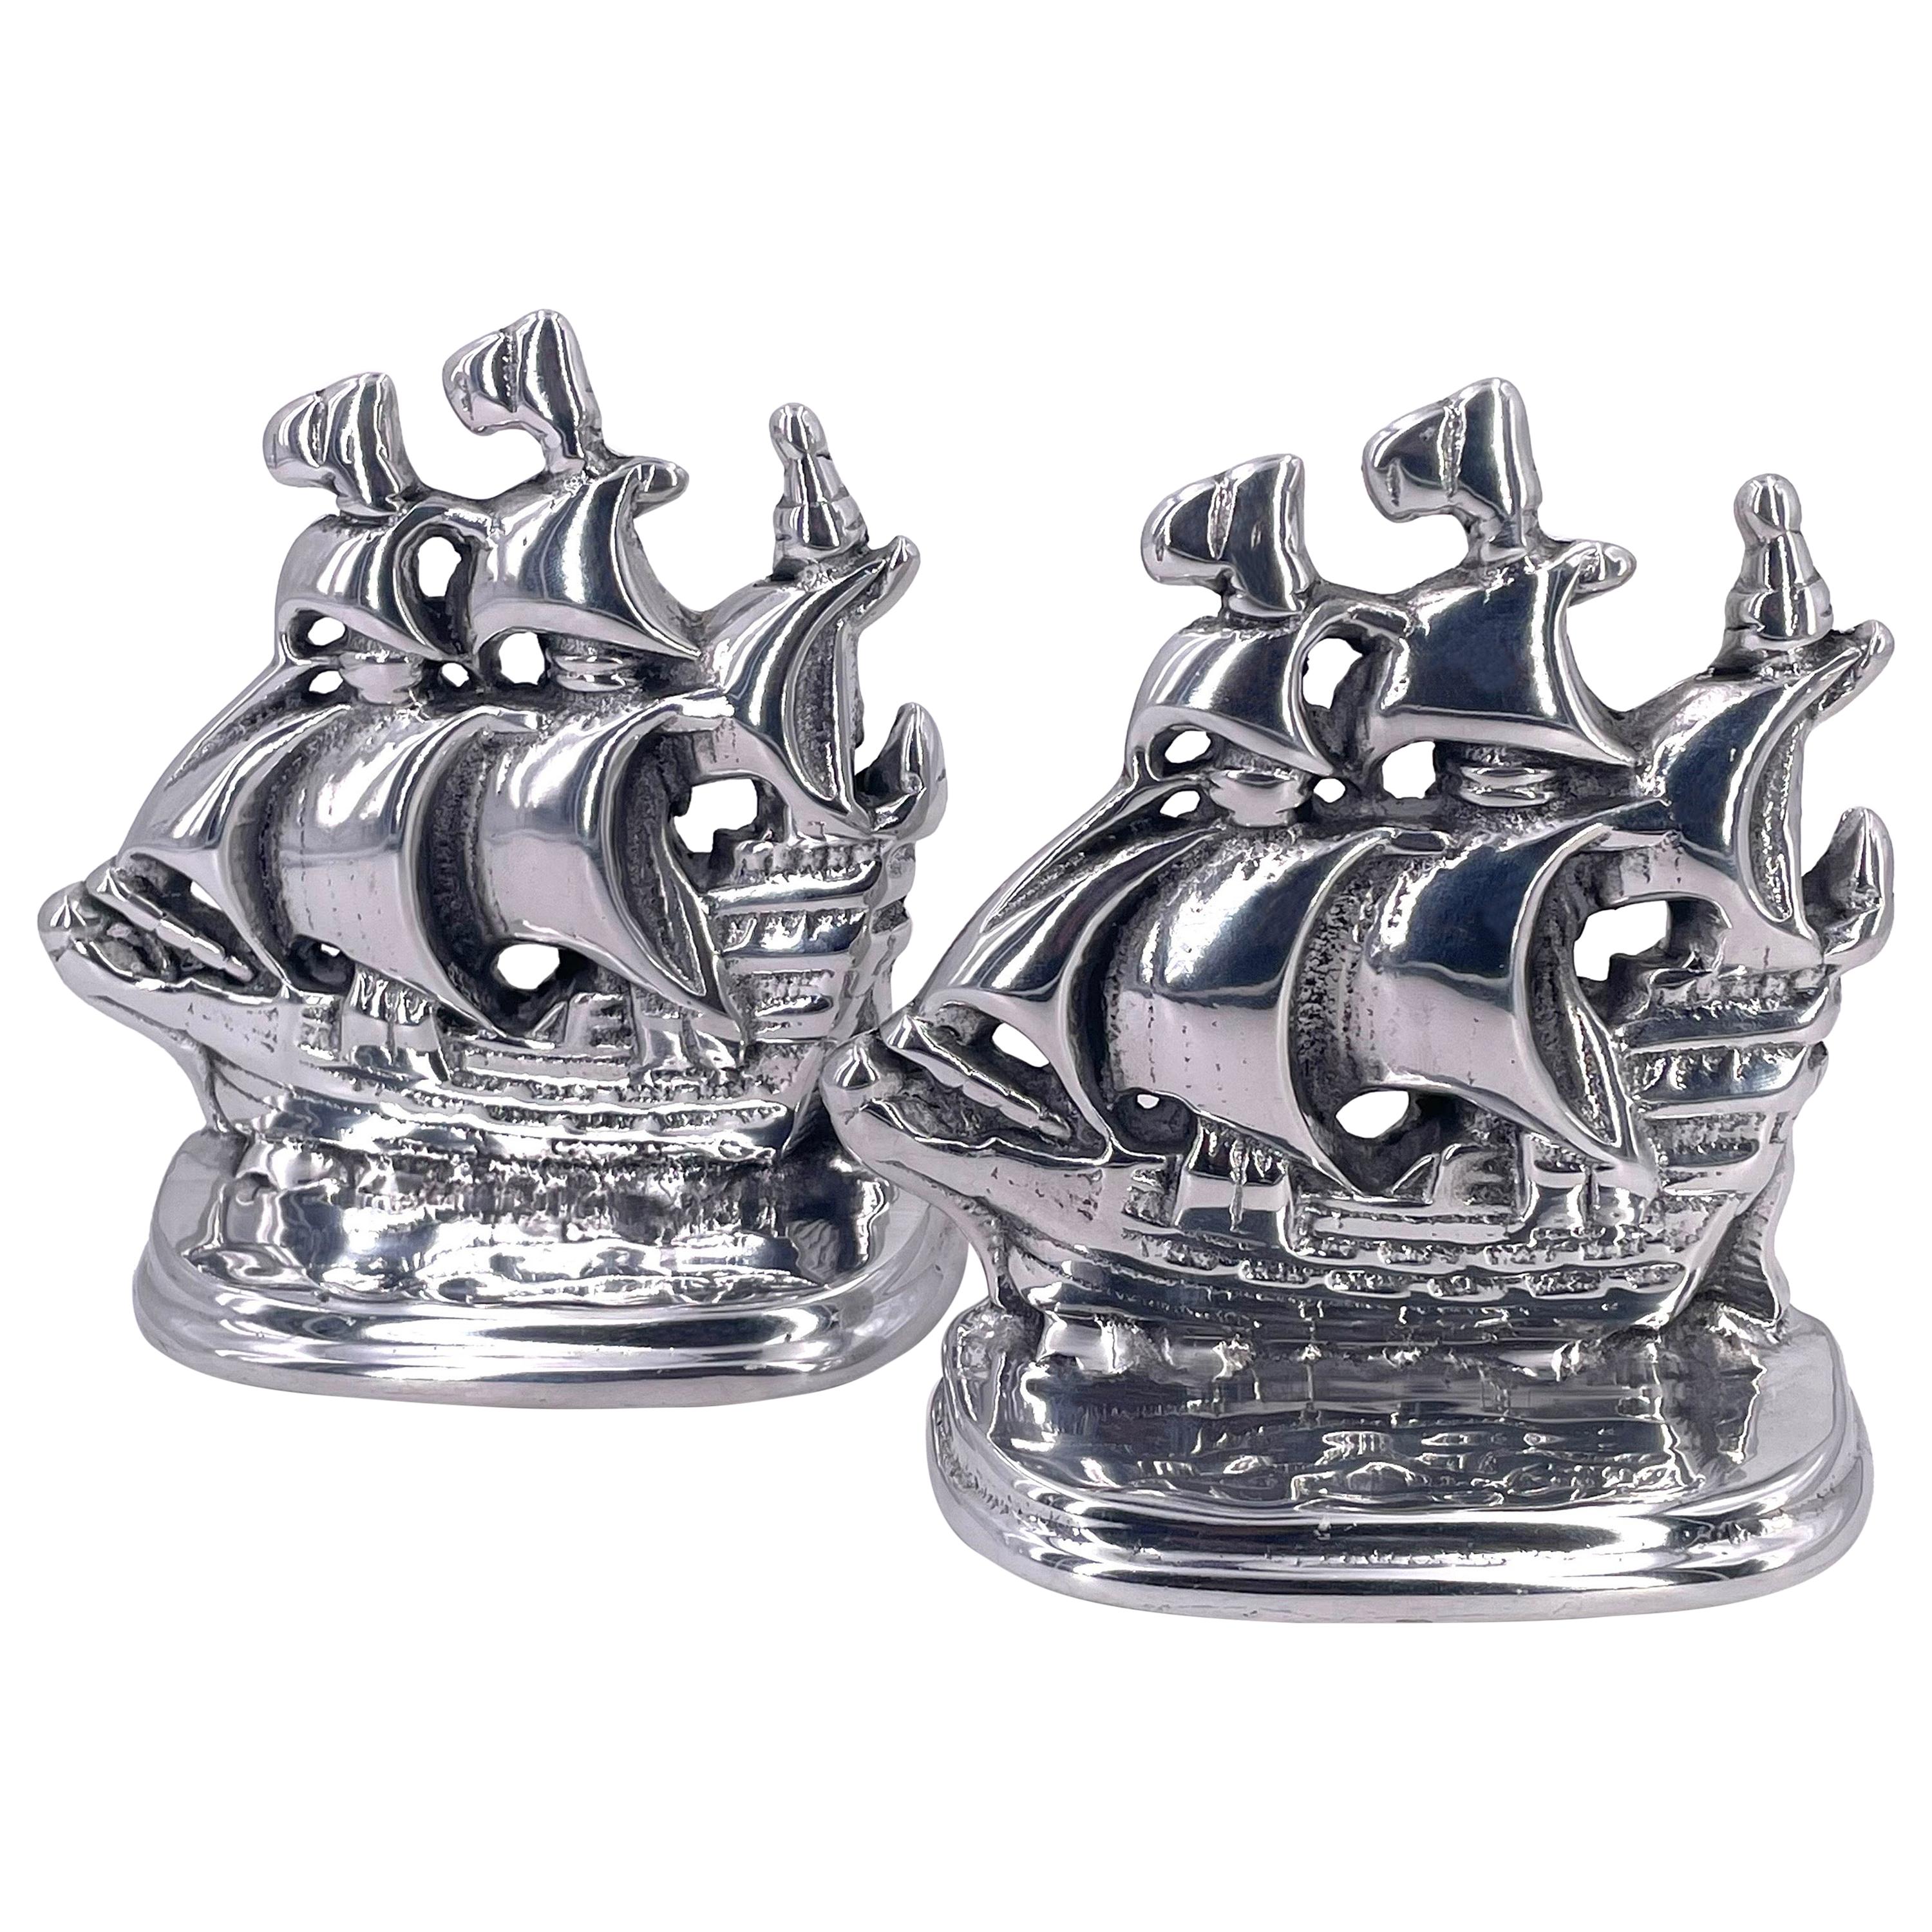 Polished Aluminum Rare Spanish Galleon Ship Sculptures by Hoselton Signed For Sale